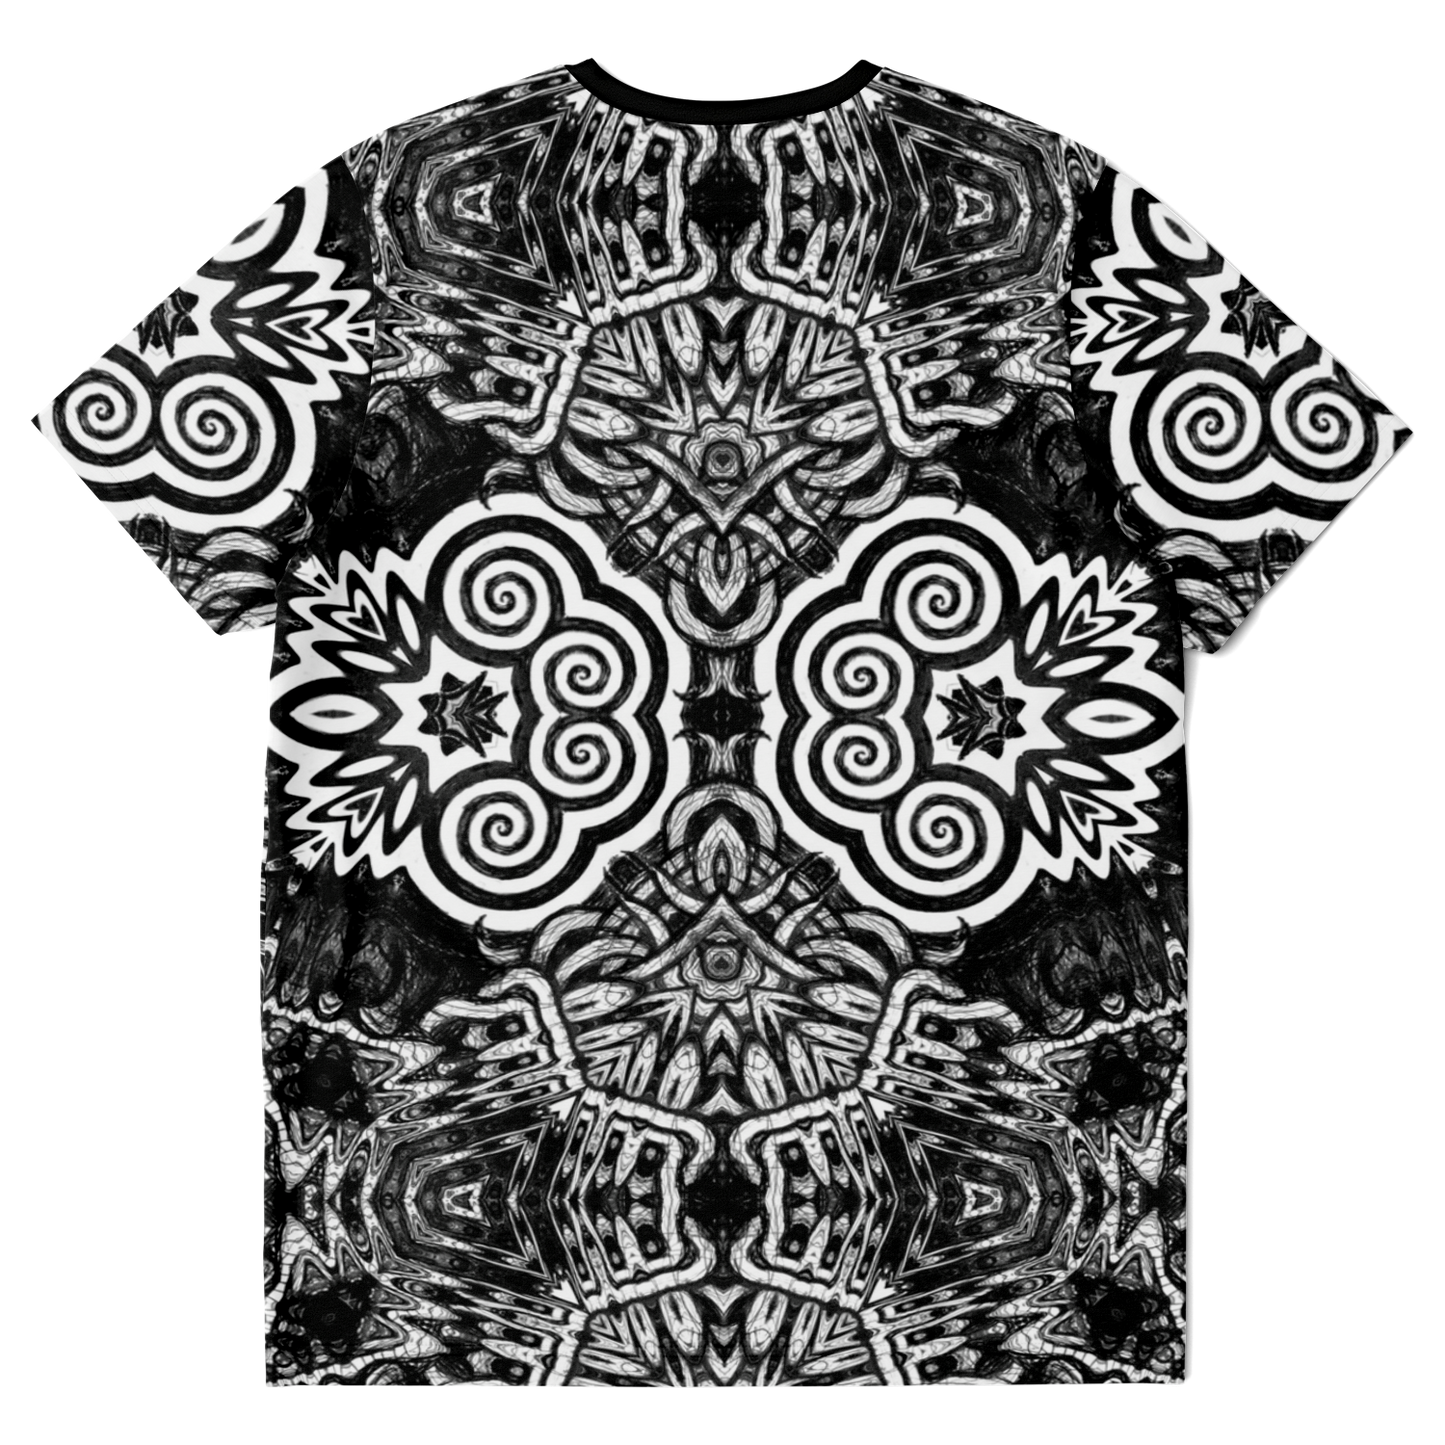 Madness in B&W Flipped T-shirt